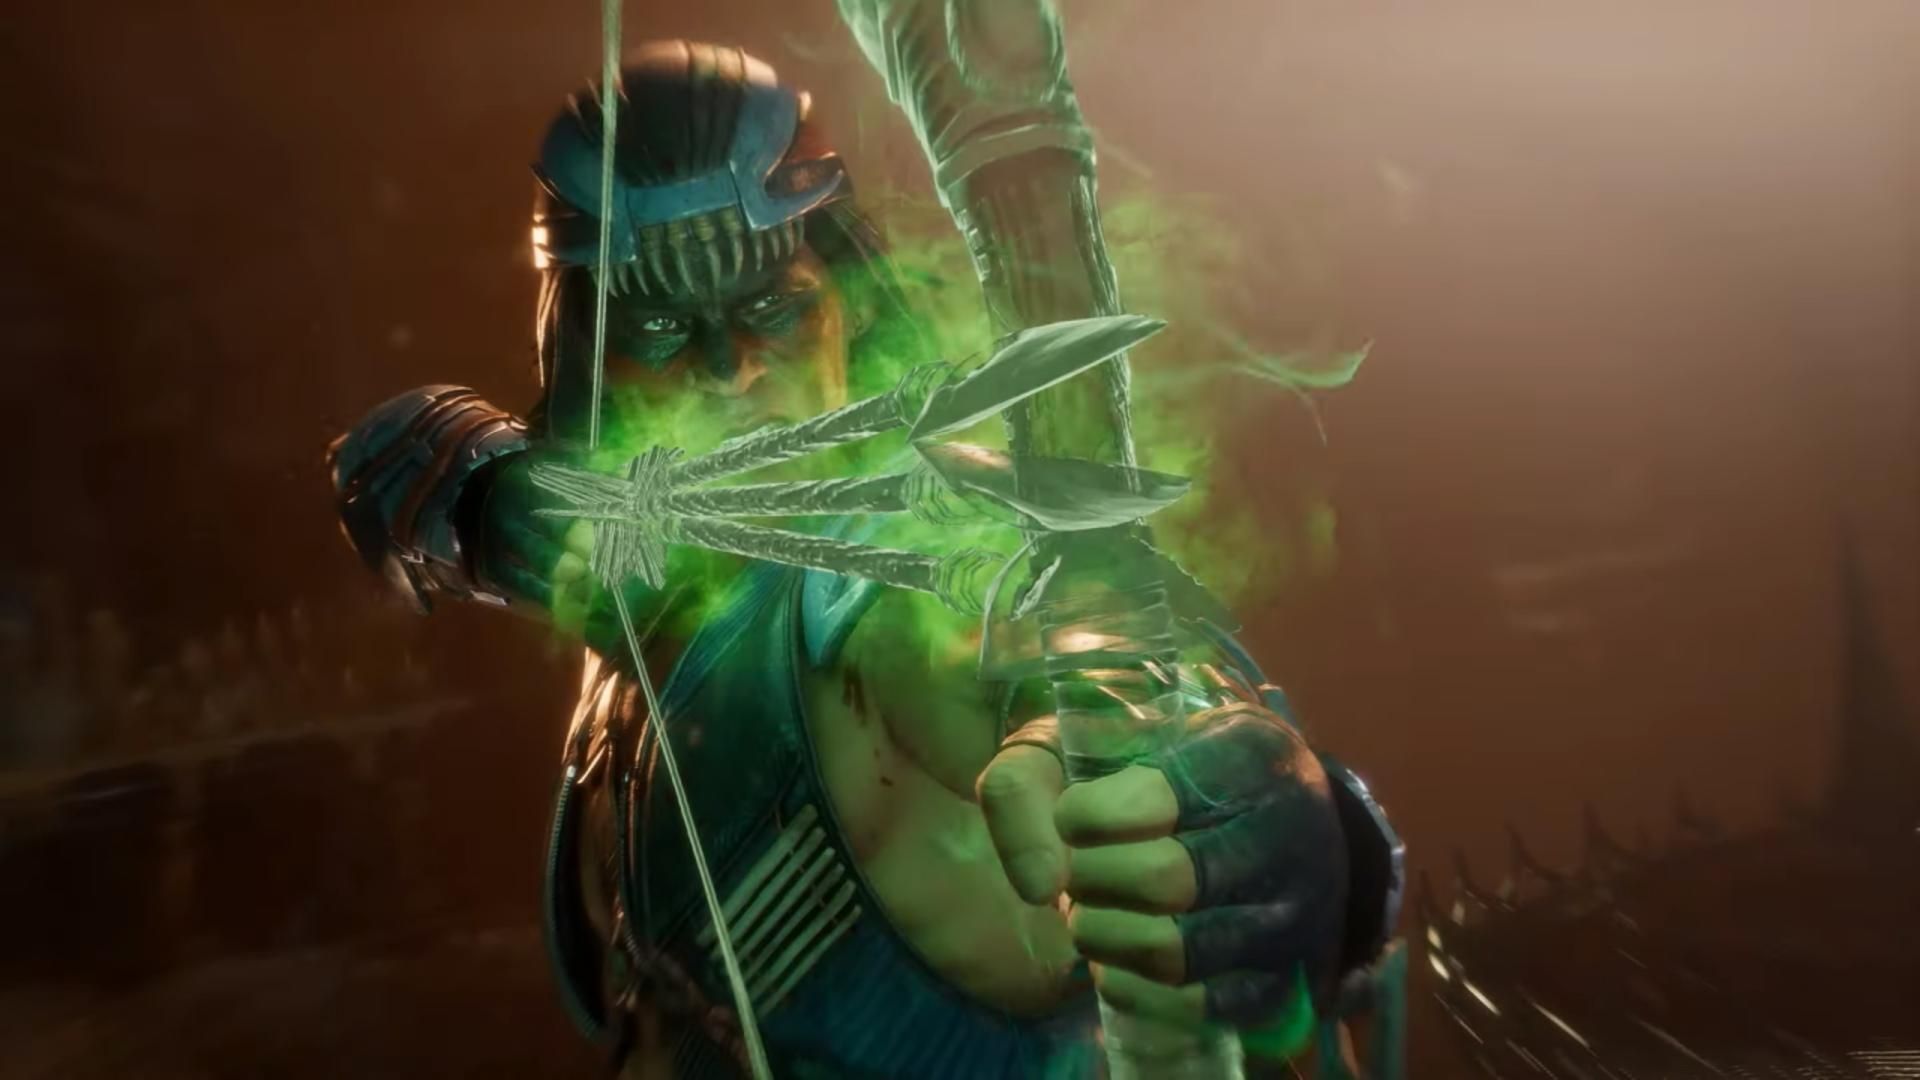 Mortal Kombat 11 Nightwolf Gameplay Trailer And Release Date Revealed